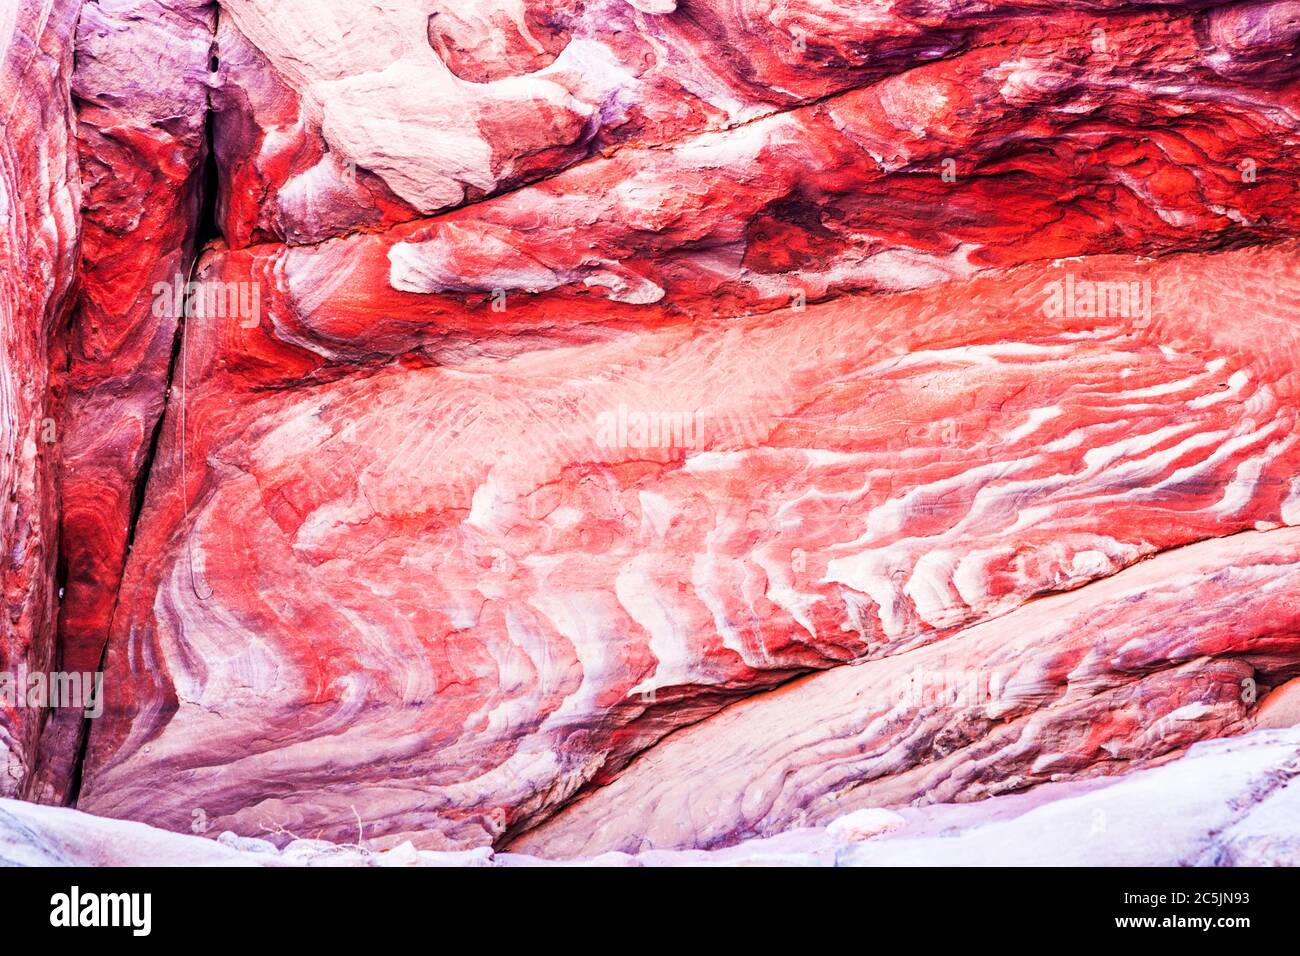 The red sandstone rock surface of the canyon known as Al Siq at the entrance to the Pink City of Petra in Jordan. Stock Photo